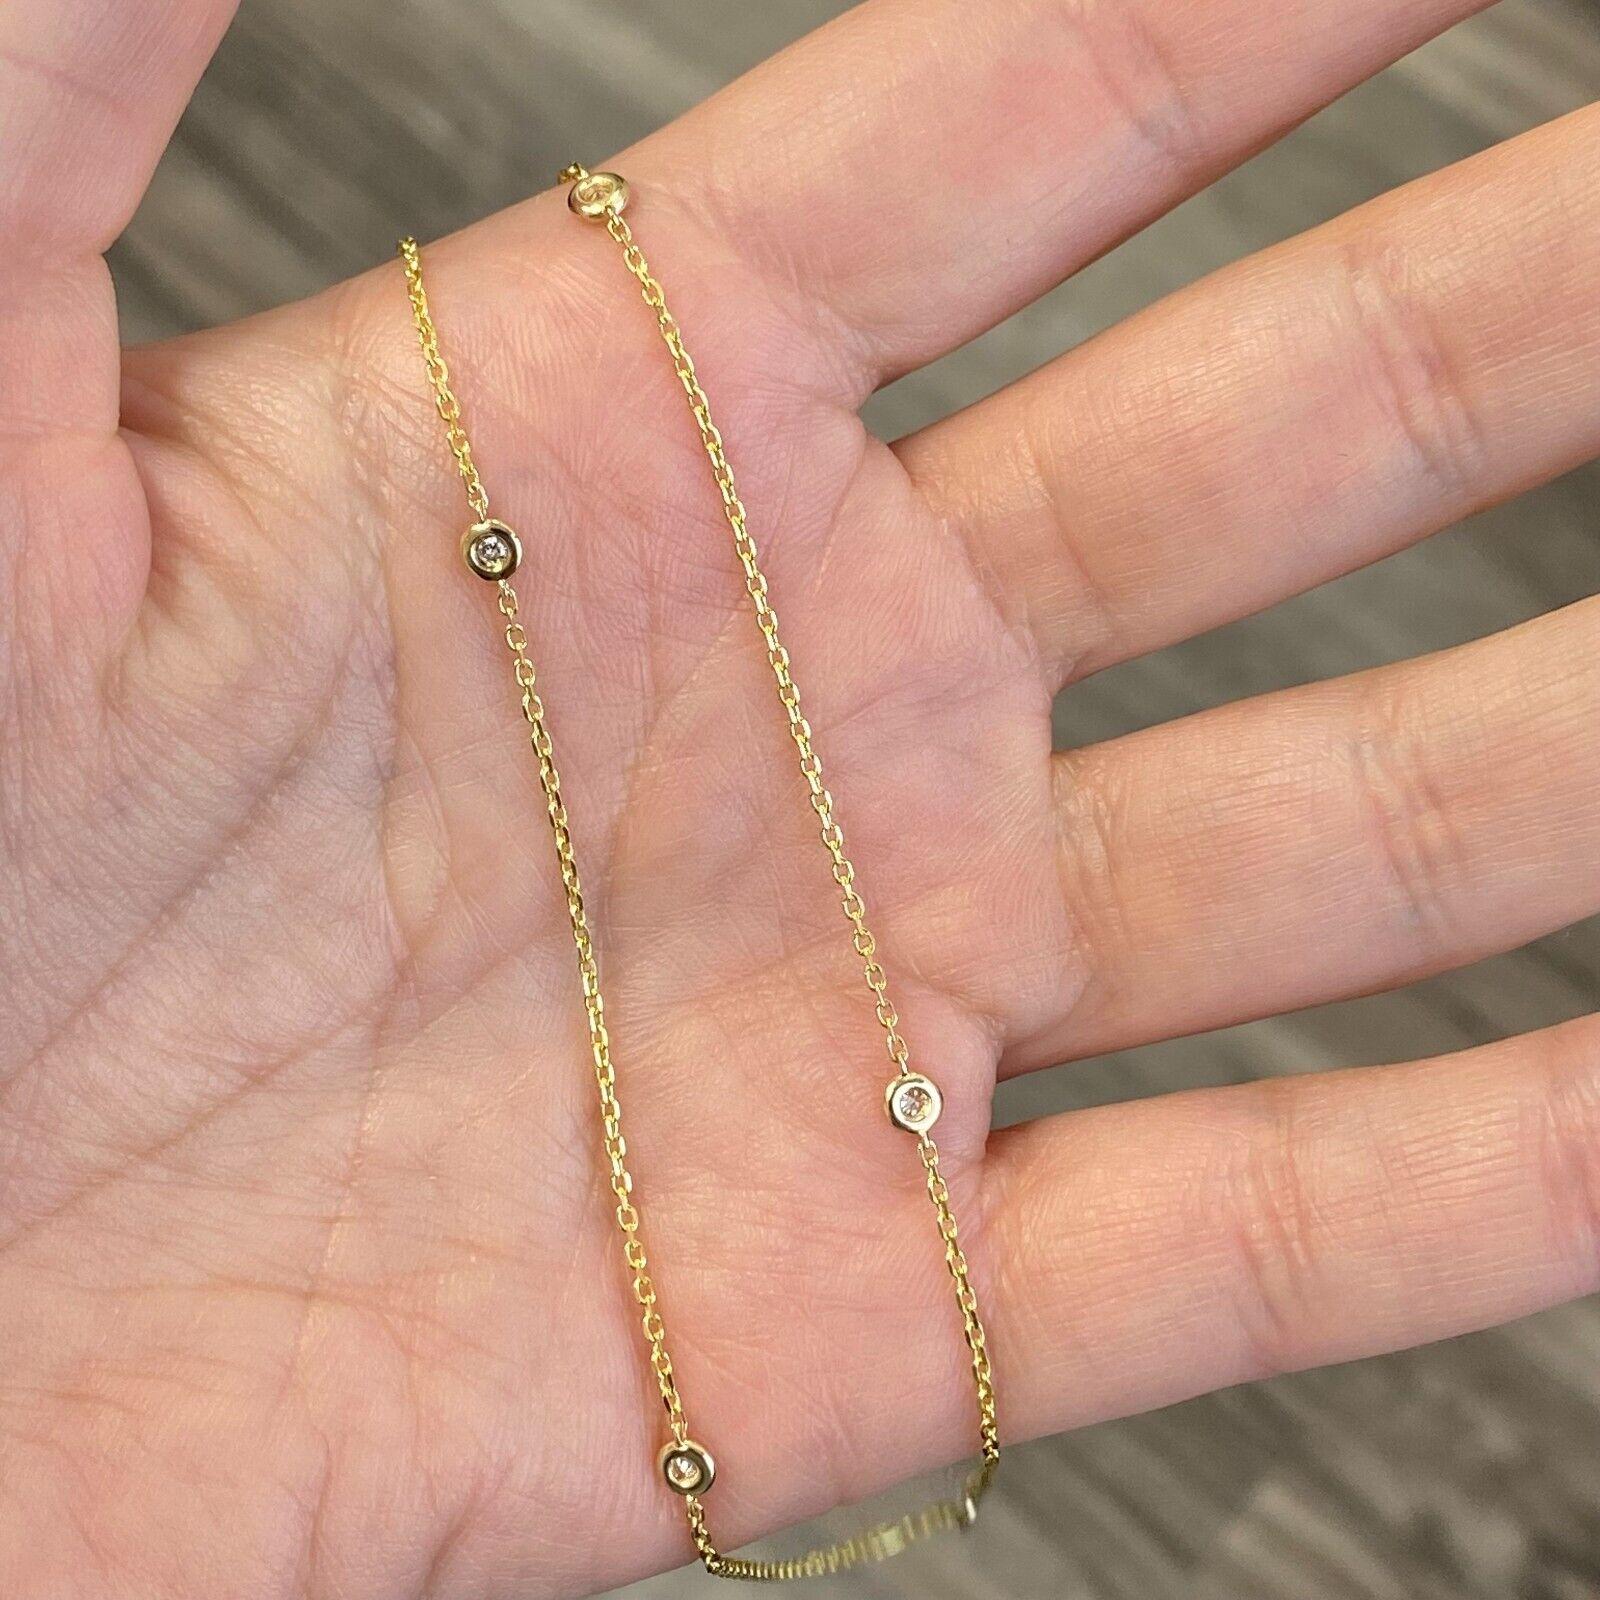 Specifications:
Custom made in Los Angeles, CA
Metal: 14K  gold
Weight: 2.6 Gr
Main Stone: Round cut Diamonds
Carat Total Weight: APPROXIMATELY 0.14 ctw
Color: I
Clarity: SI
Chain Length: 16-18 INCH
Hallmark: '14K'